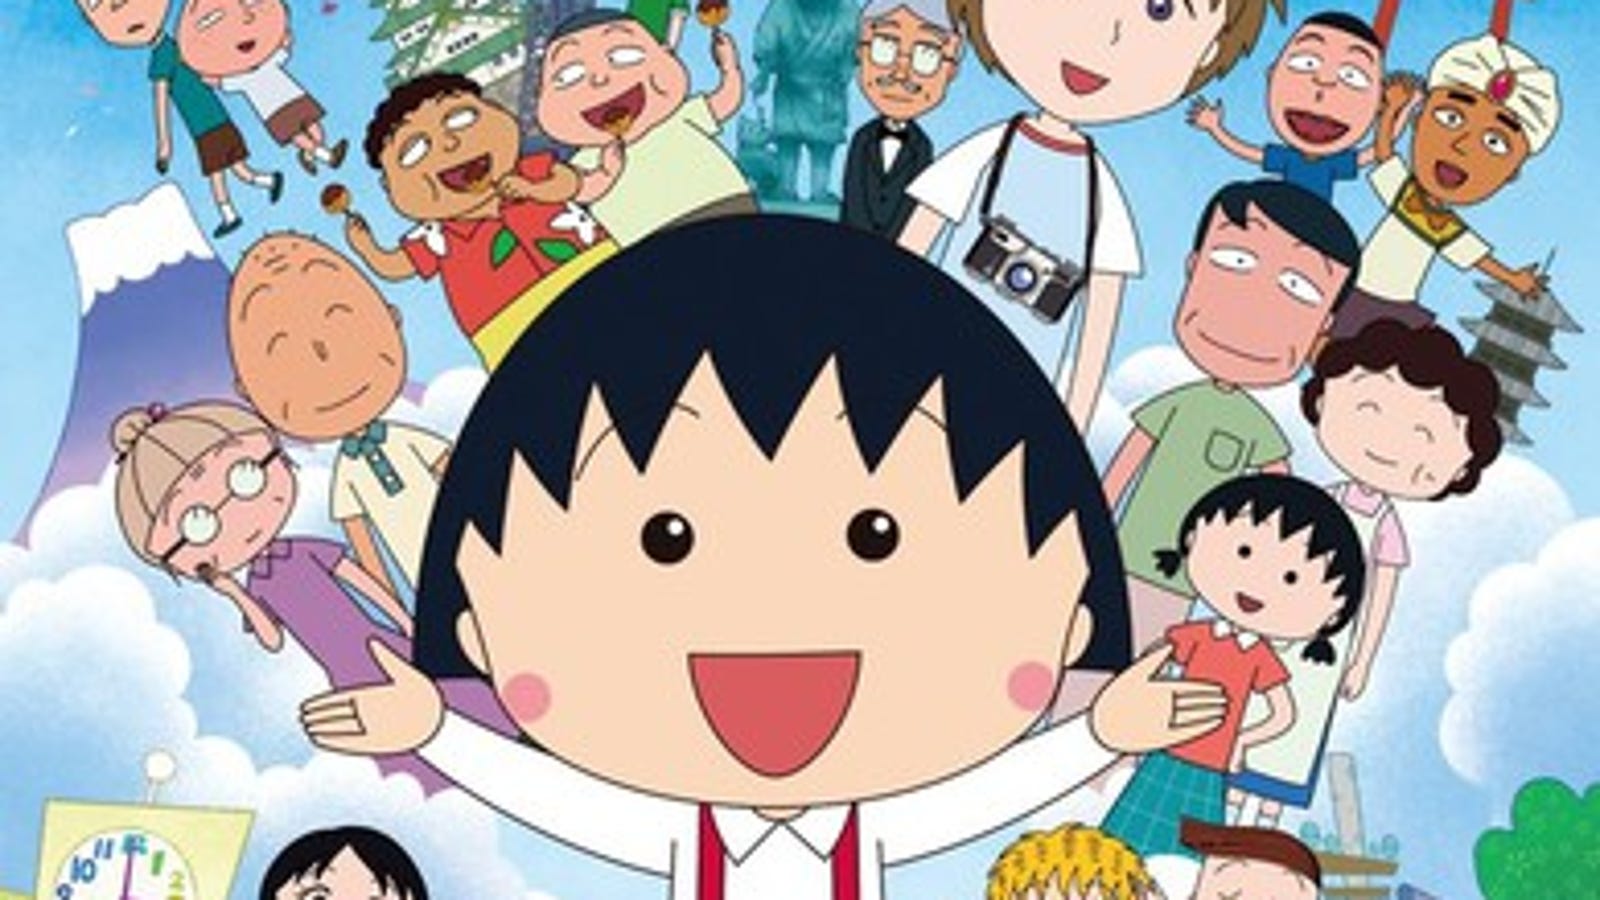 Here it is the English Subbed Chibi Maruko Chan Anime Film